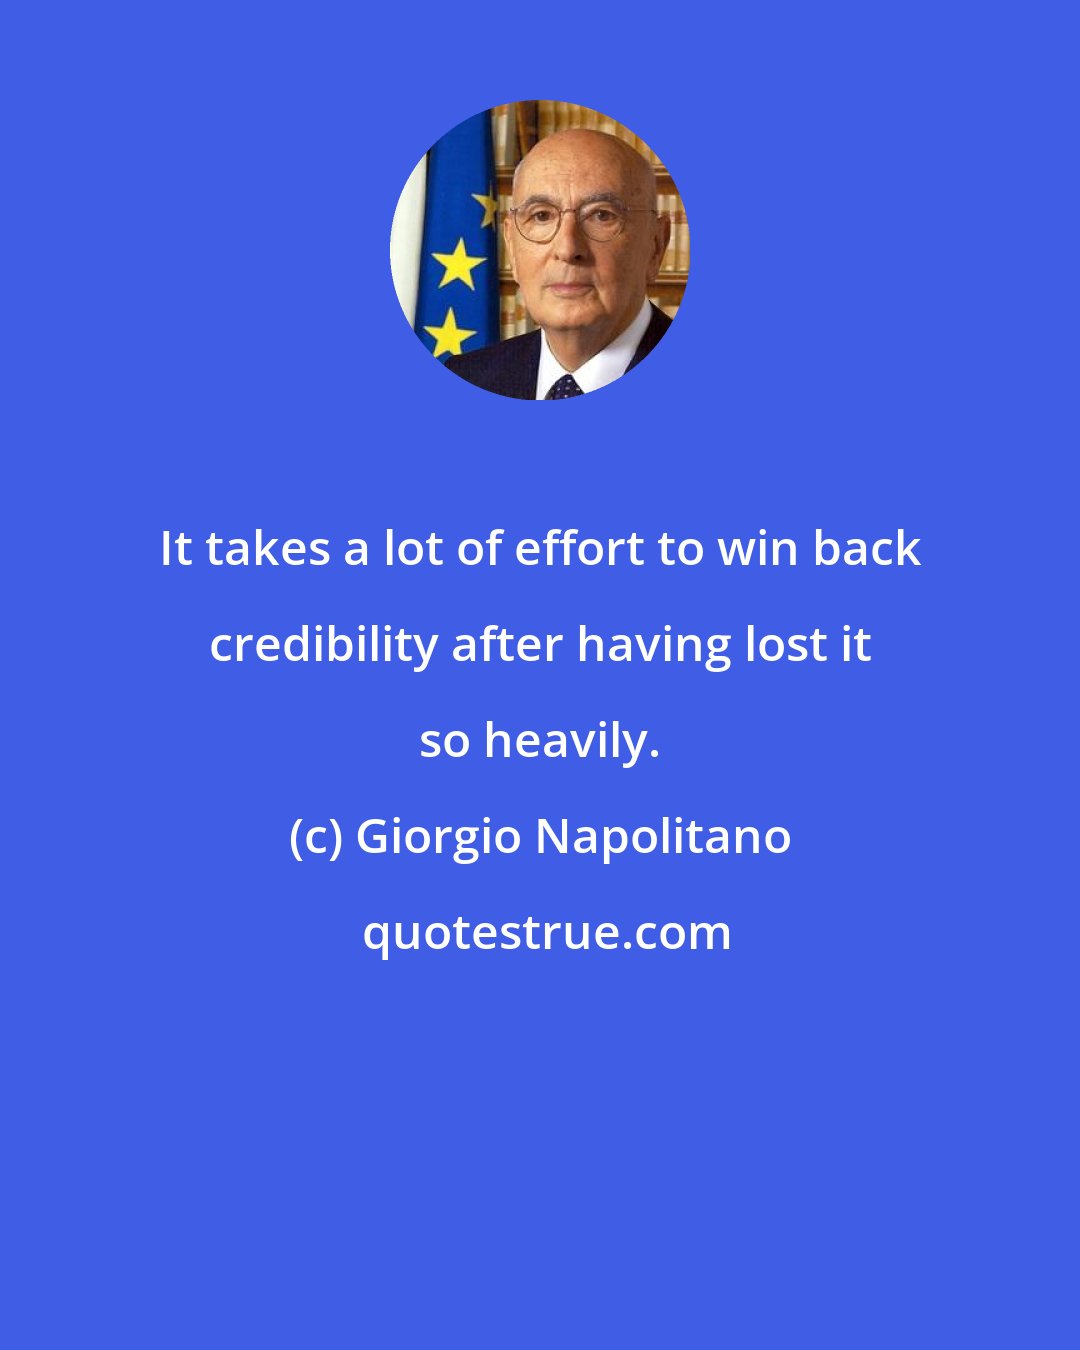 Giorgio Napolitano: It takes a lot of effort to win back credibility after having lost it so heavily.